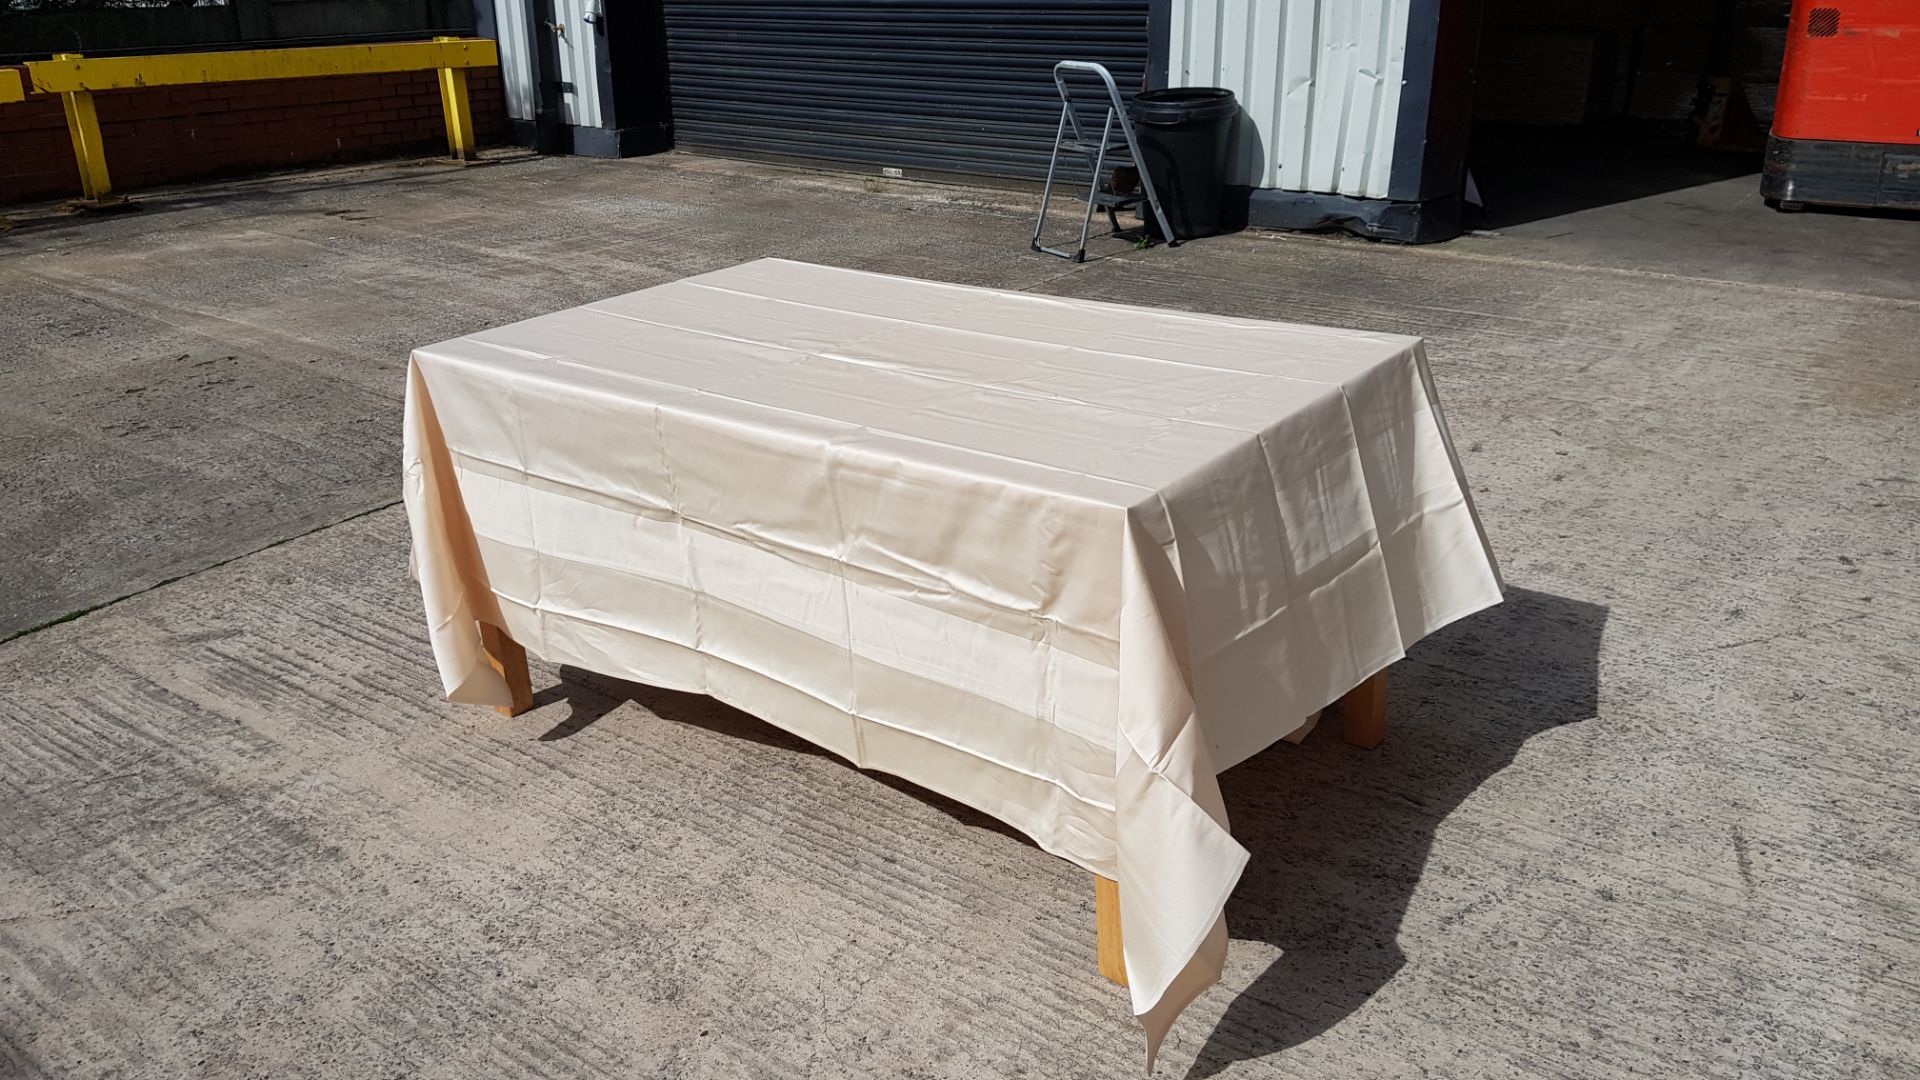 40 X BRAND NEW SAND SATIN POLYESTER TYPE TABLECLOTHS 230CM X 230CM - IN 2 TRAYS (NOT INCLUDED)